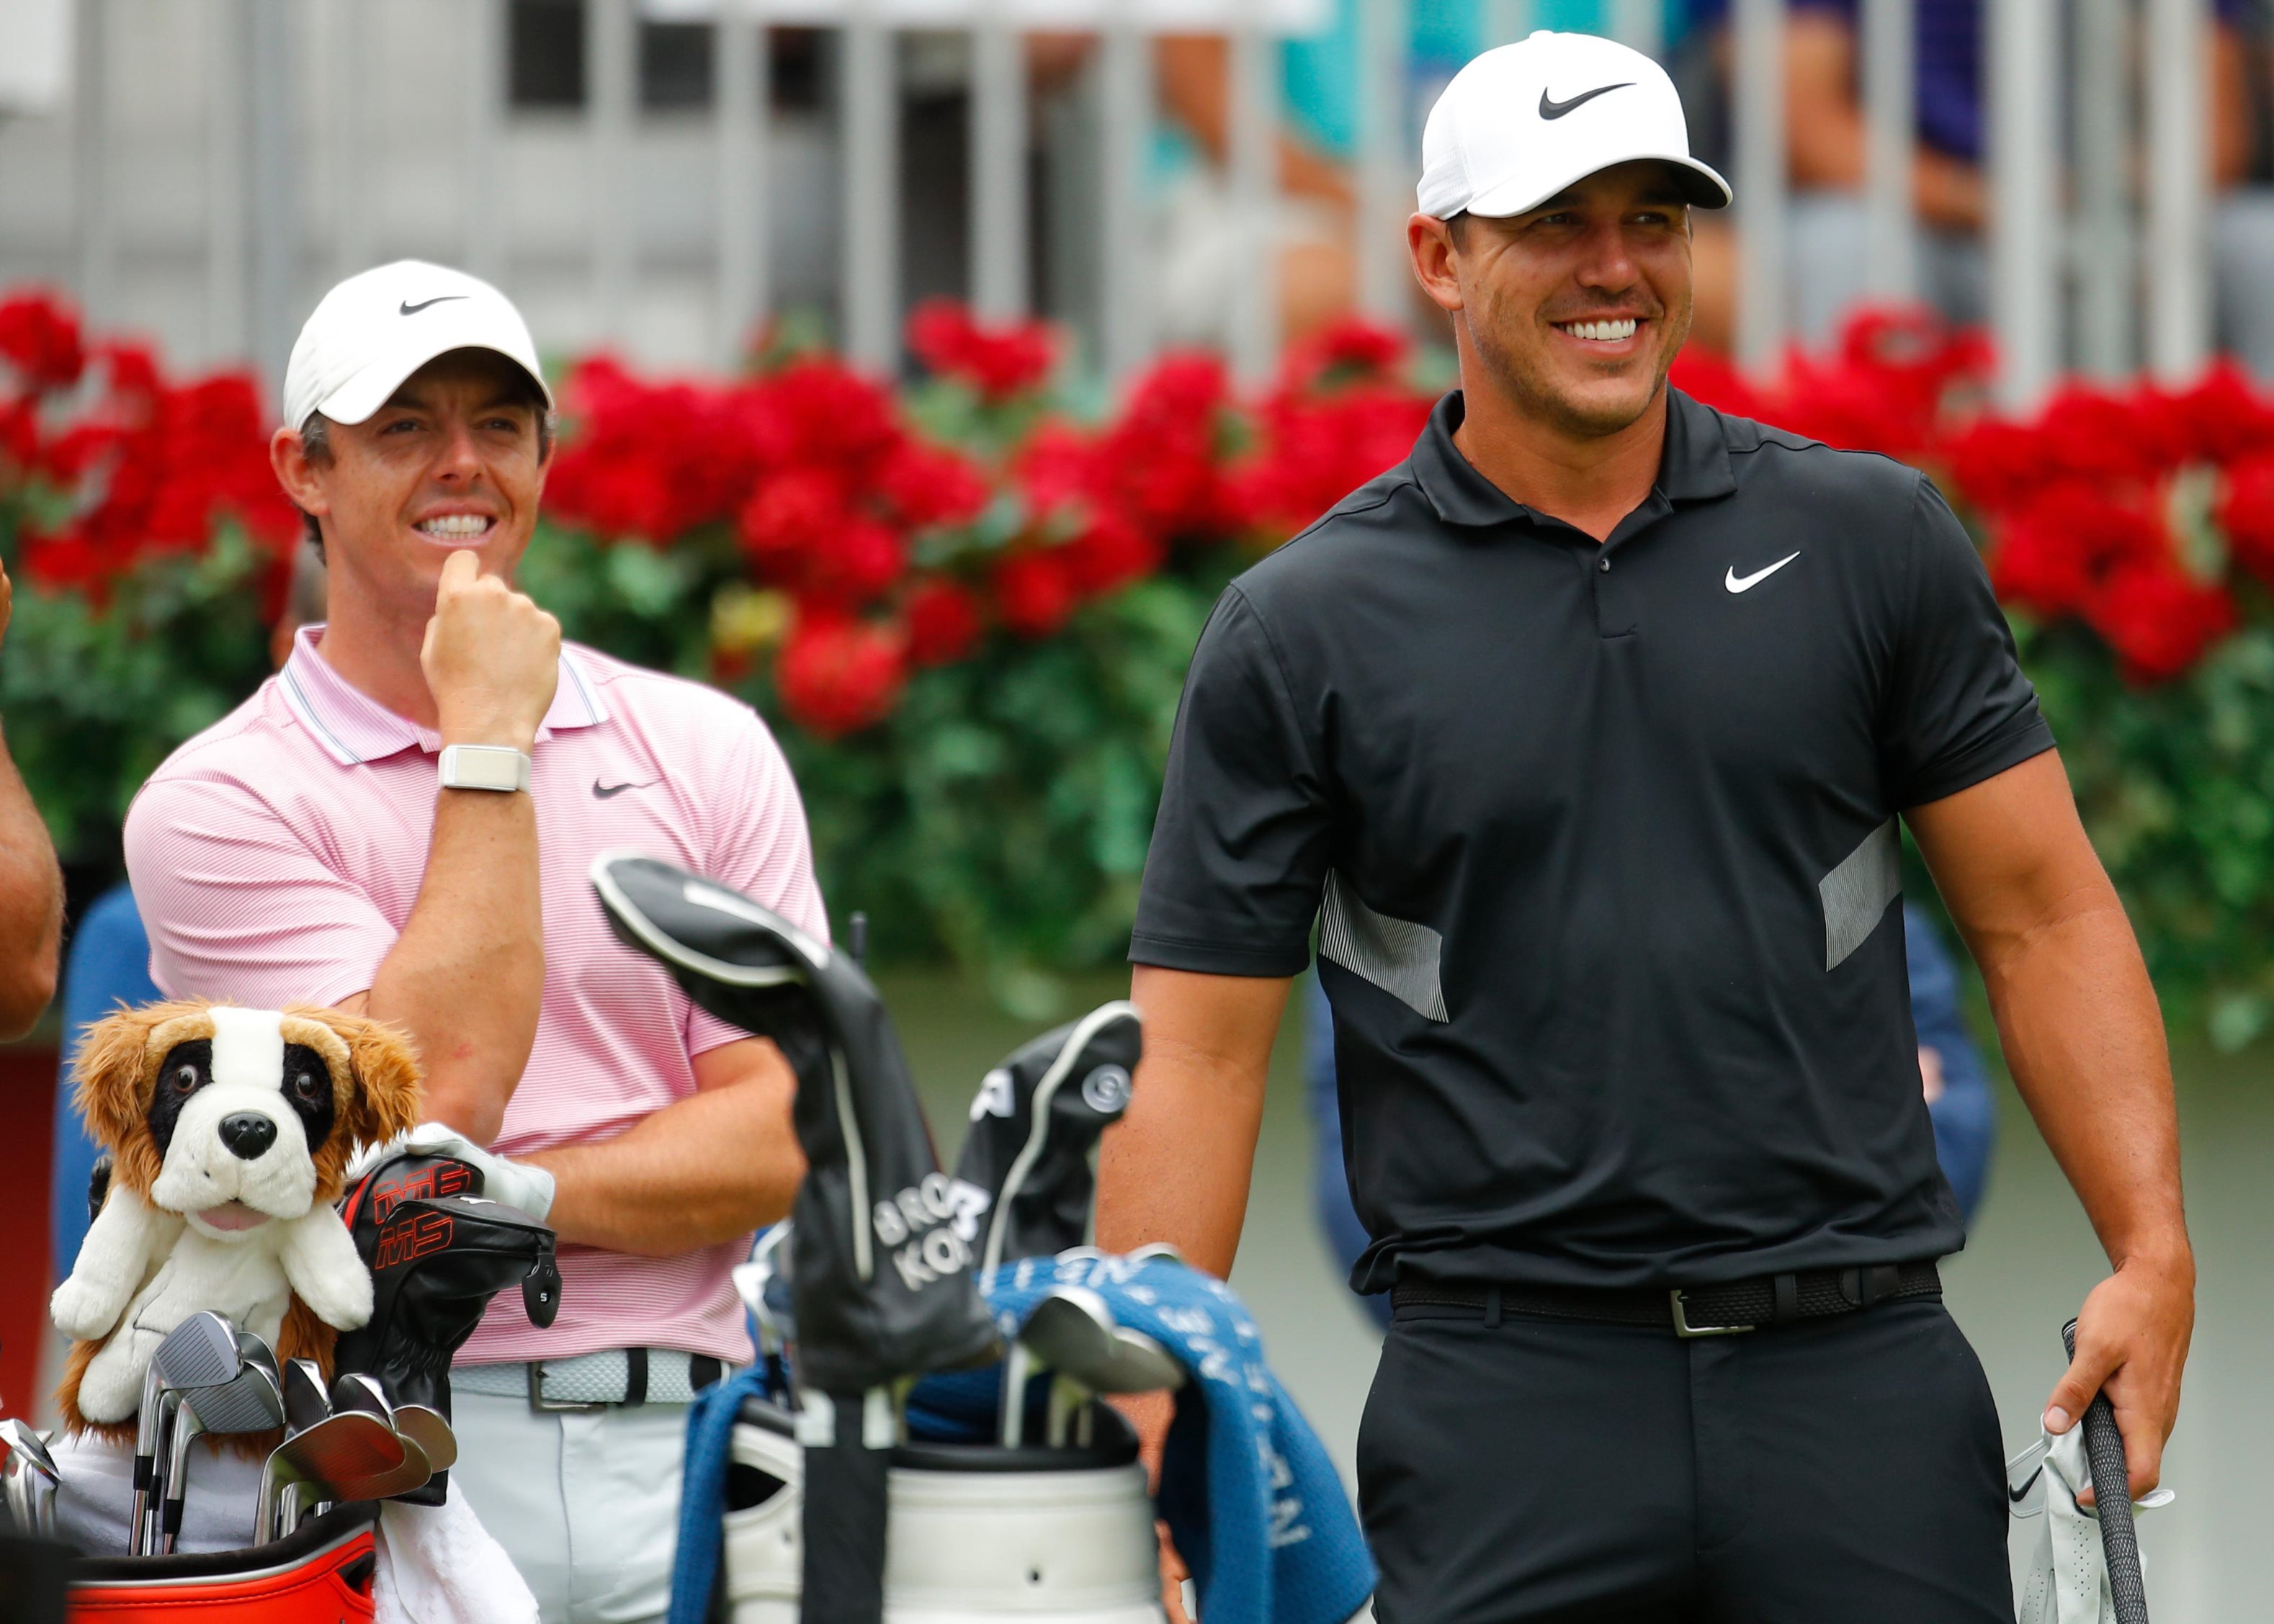 Rory And Brooks -- Head-To-Head For 36 Holes At The Players